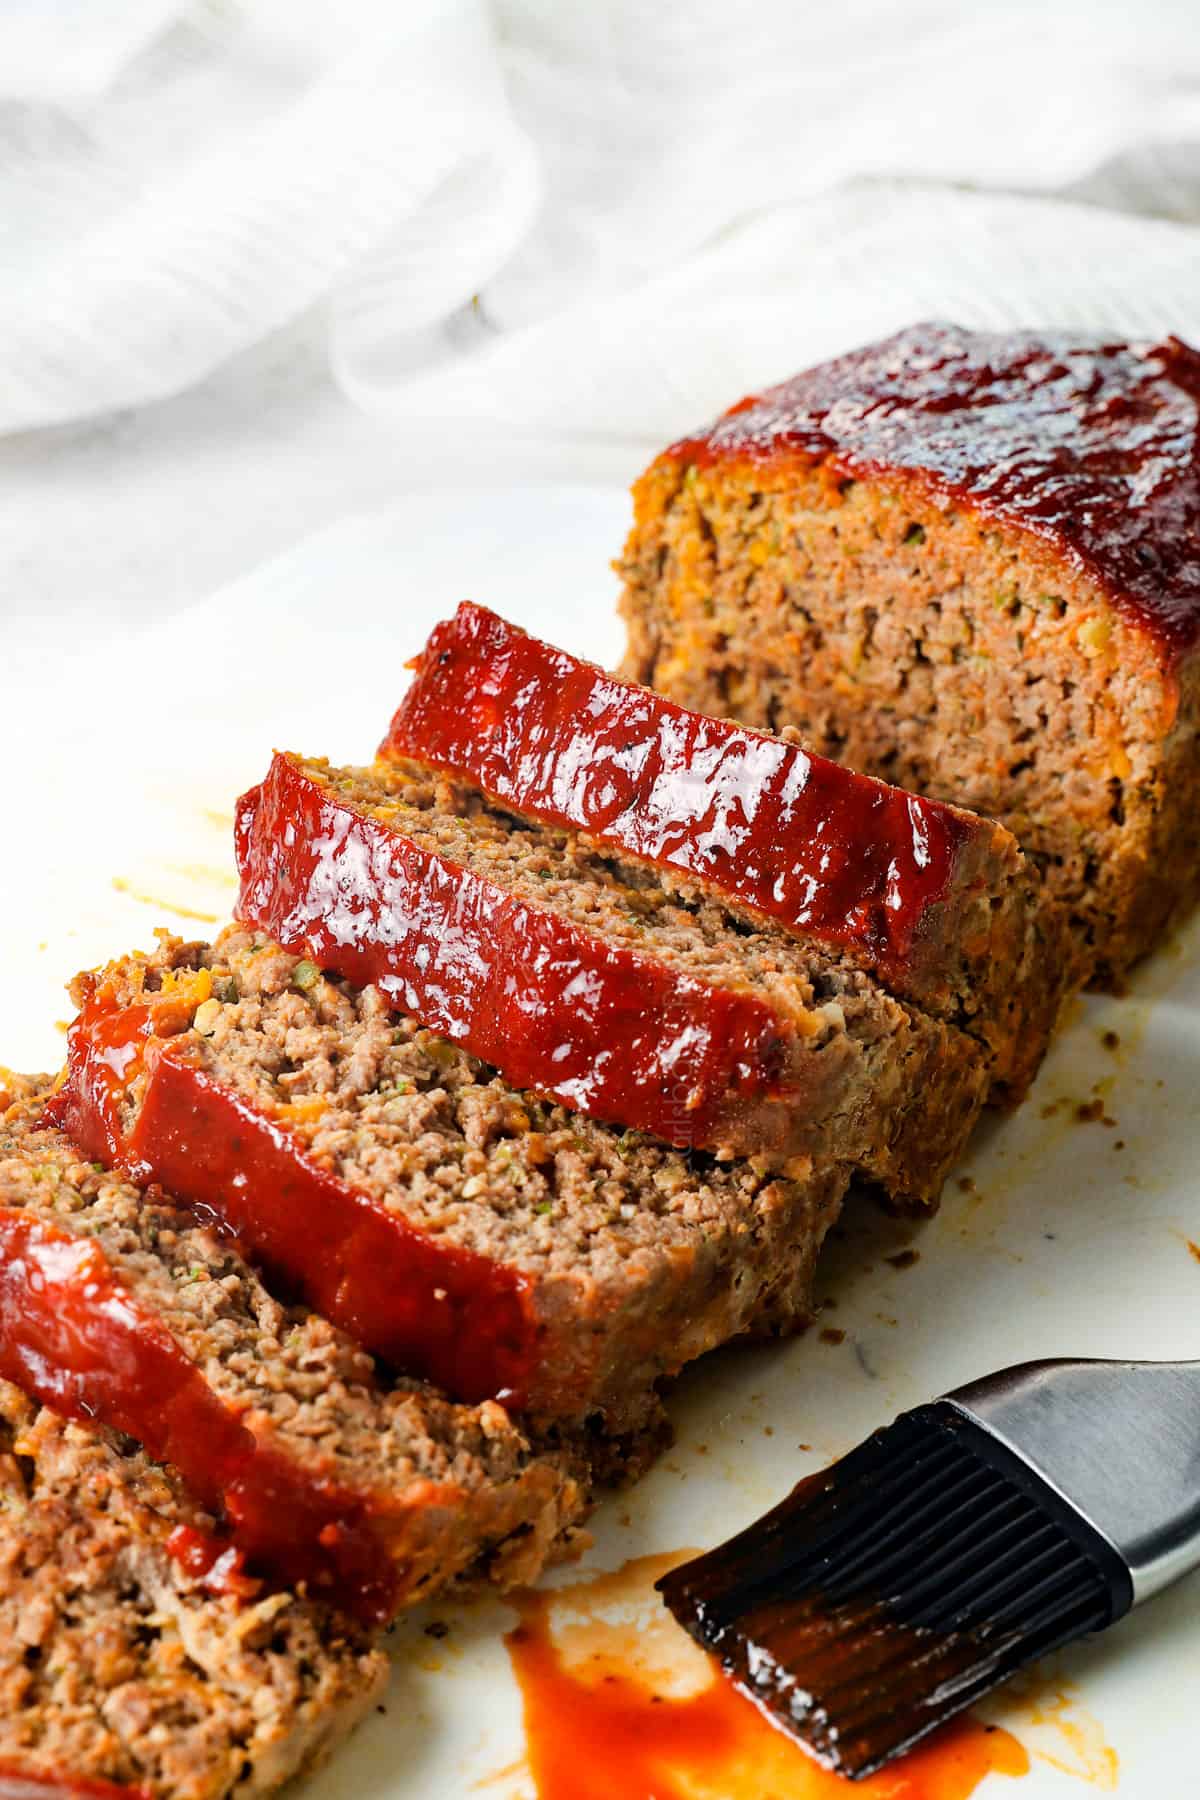 best meatloaf recipe sliced on a cutting board showing how juicy it is